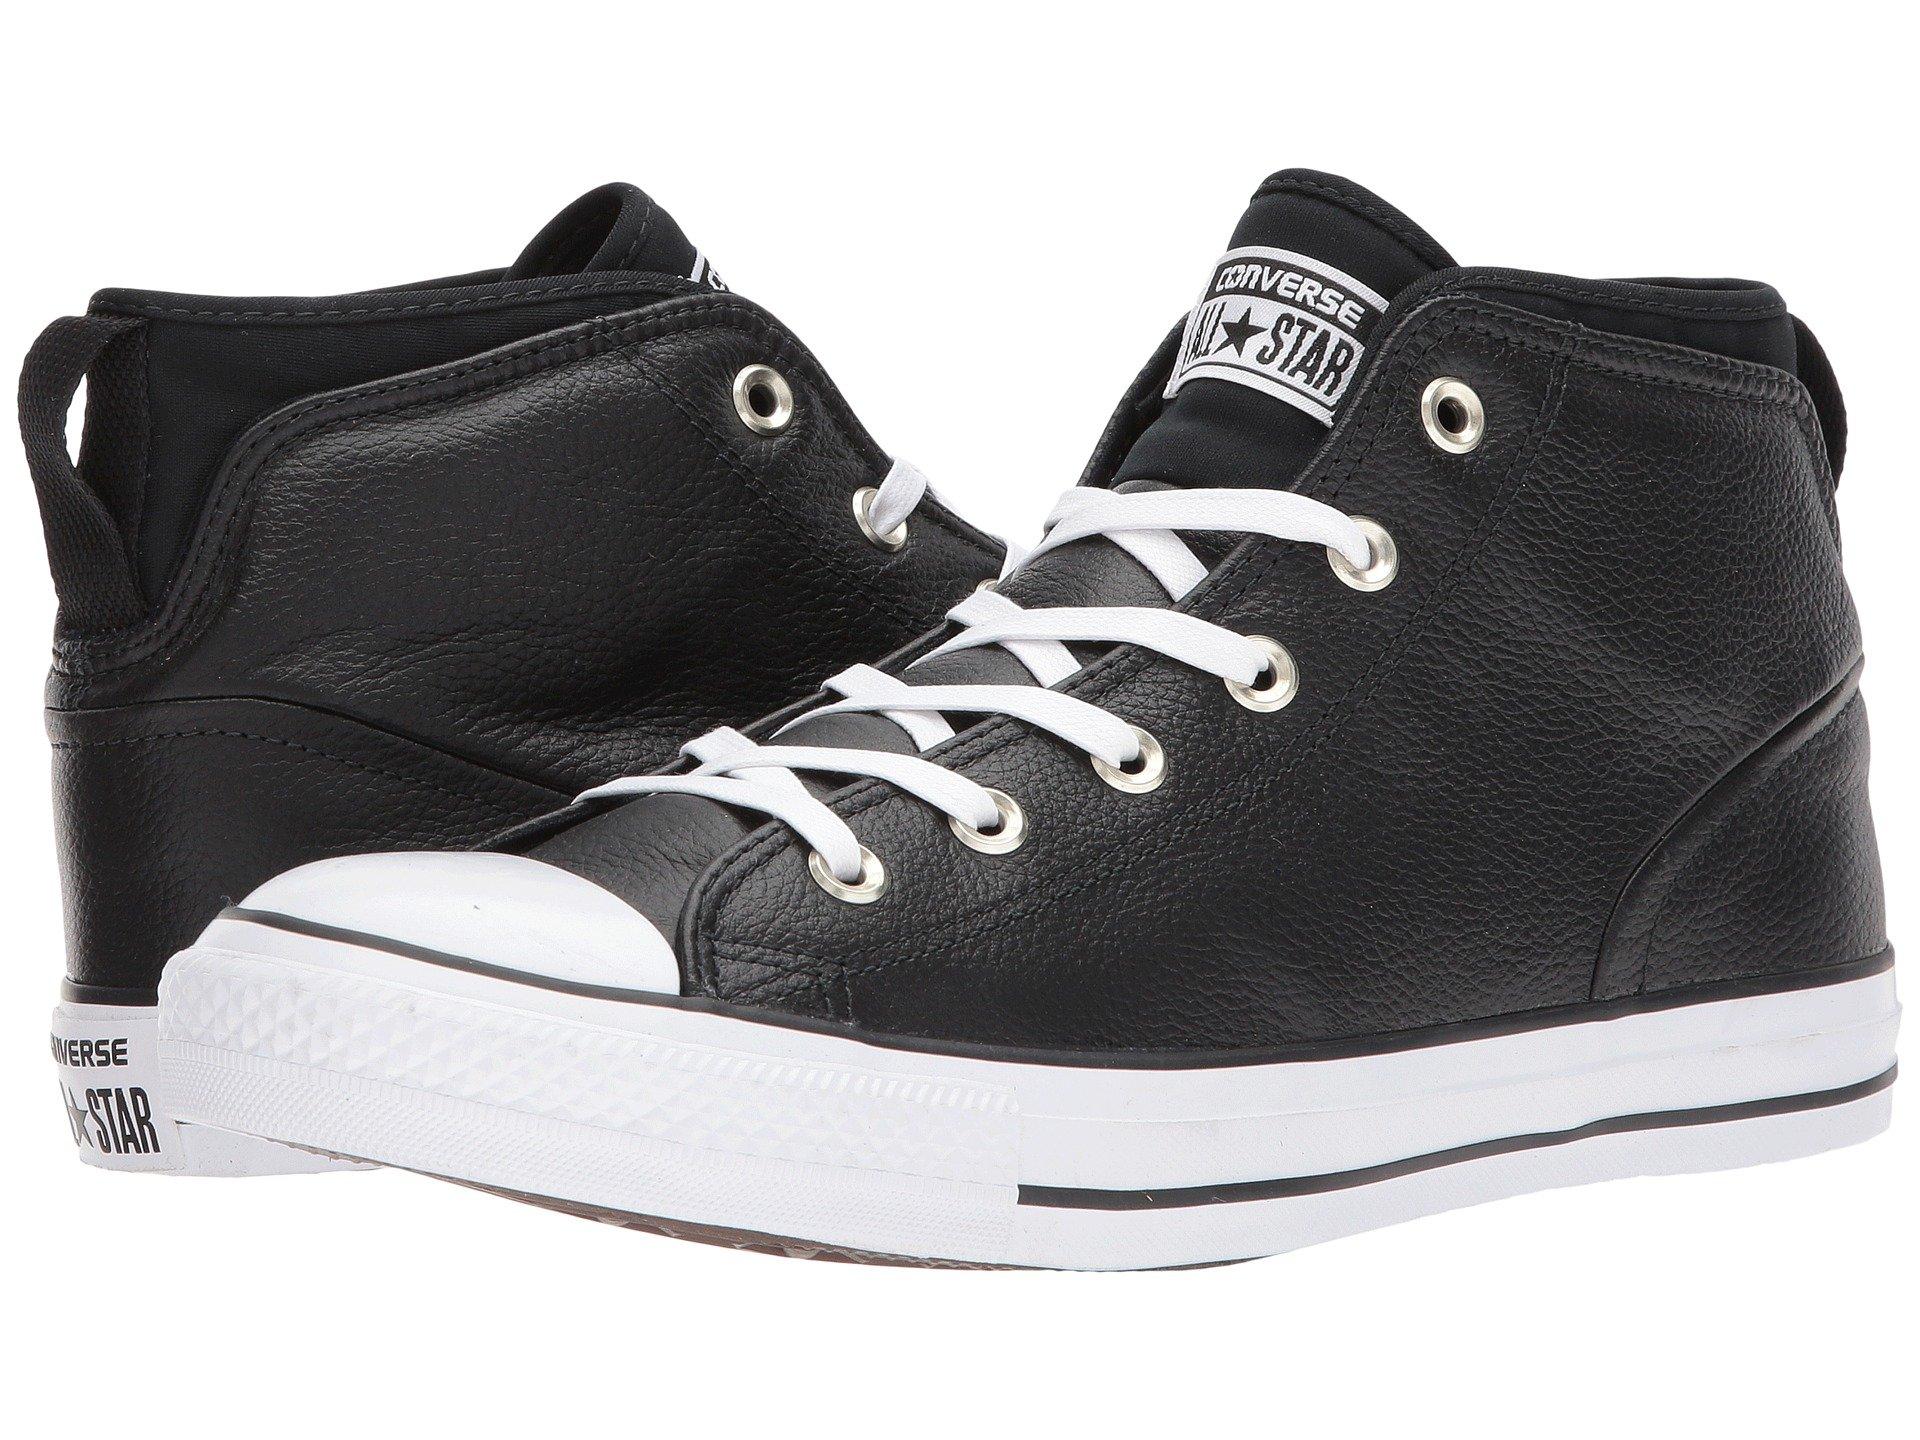 converse unisex chuck taylor all star syde street mid sneaker